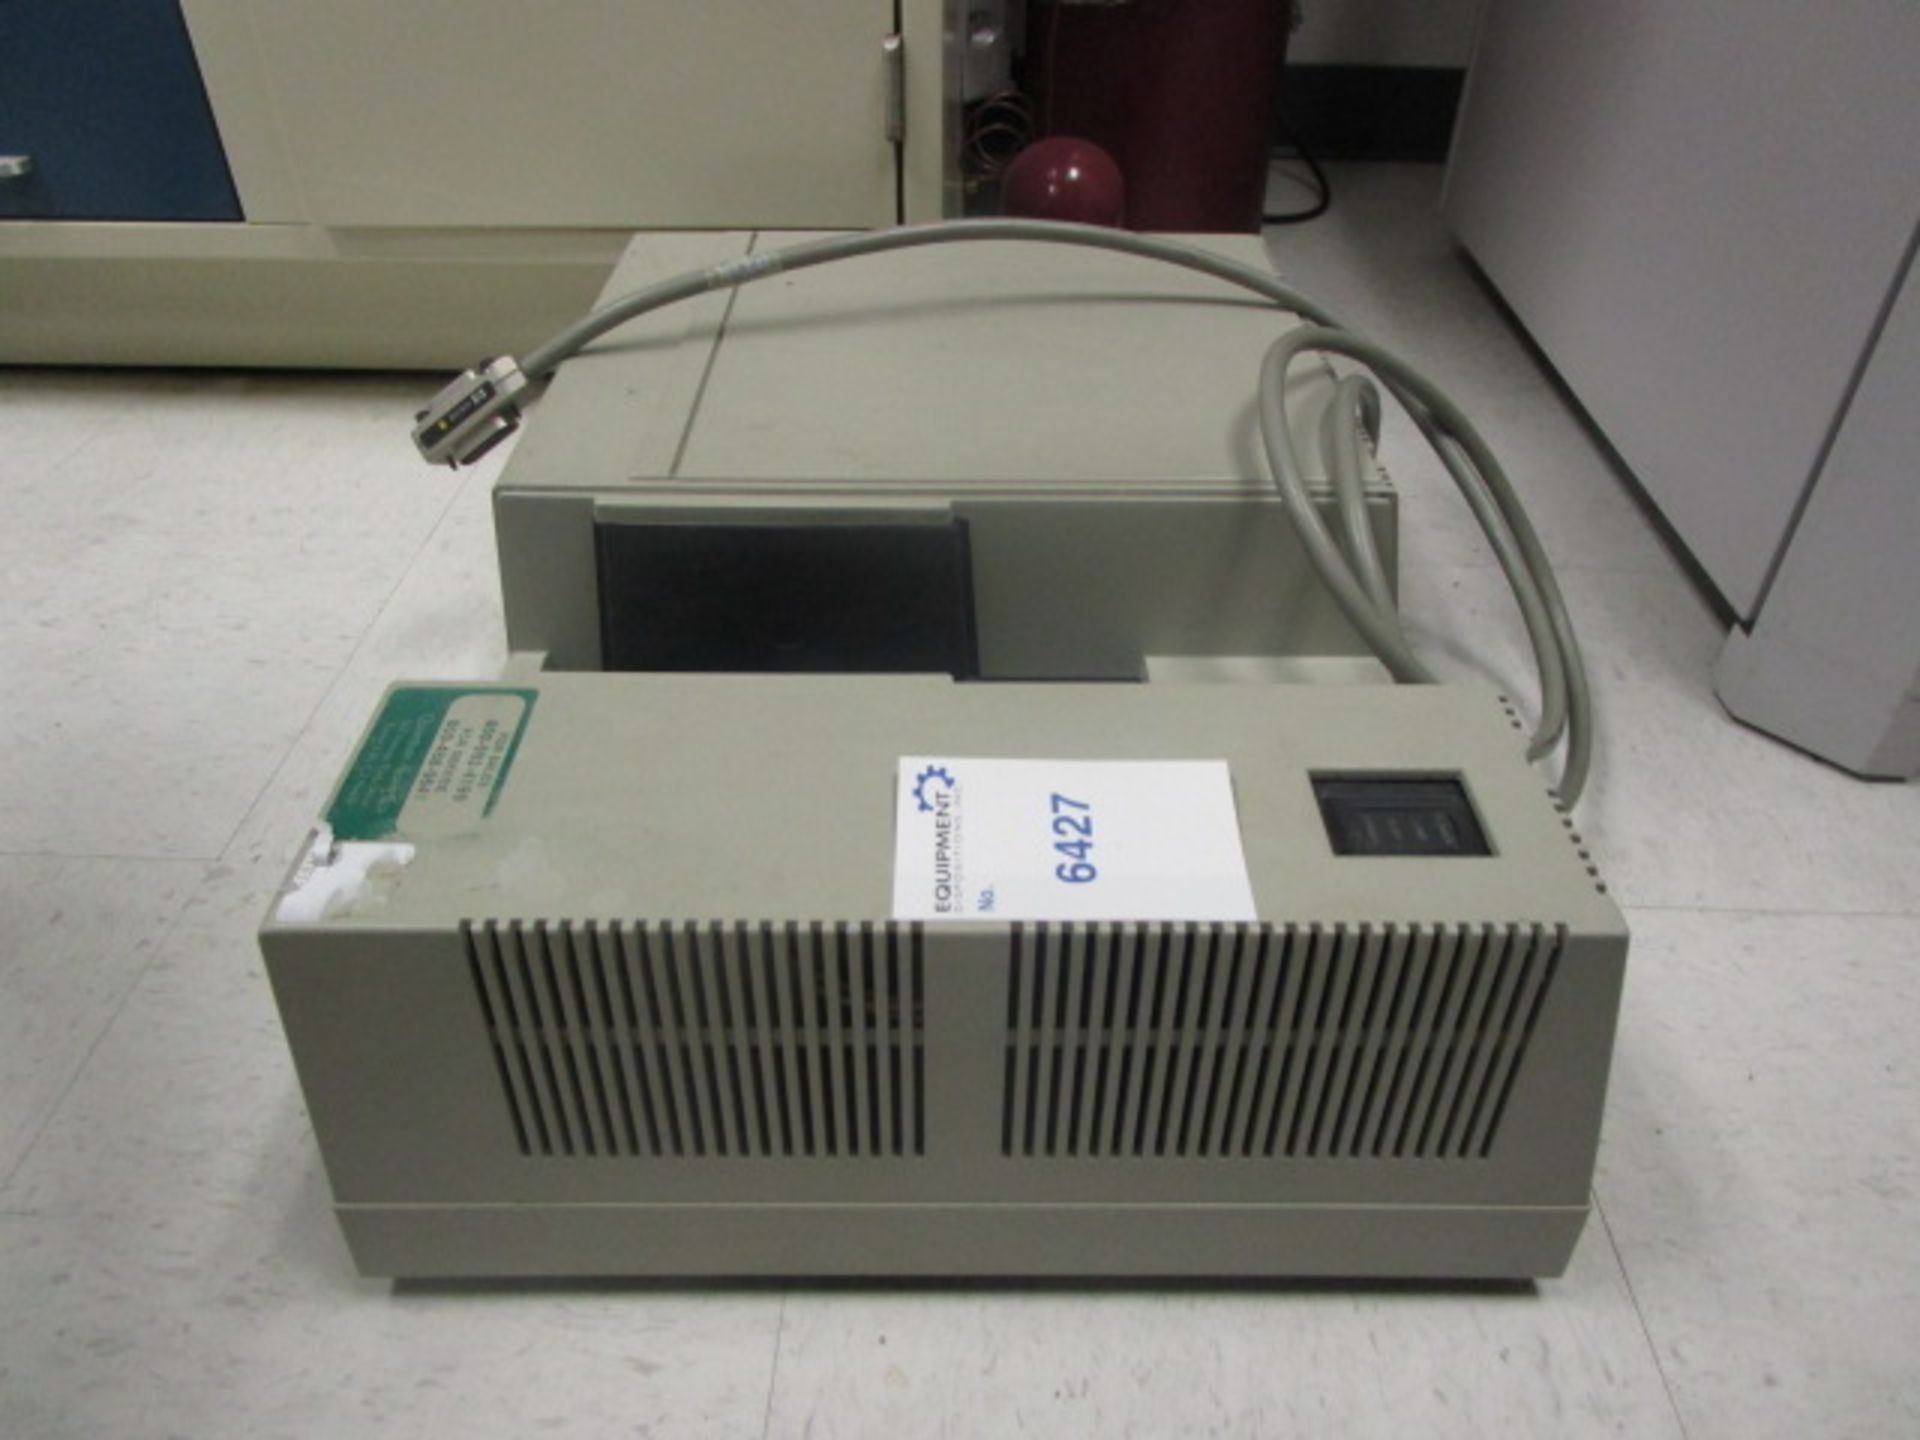 Hewlett Packard 8452 UV-Vis Spectro Photometer with gpib cable (for parts) - Image 5 of 6